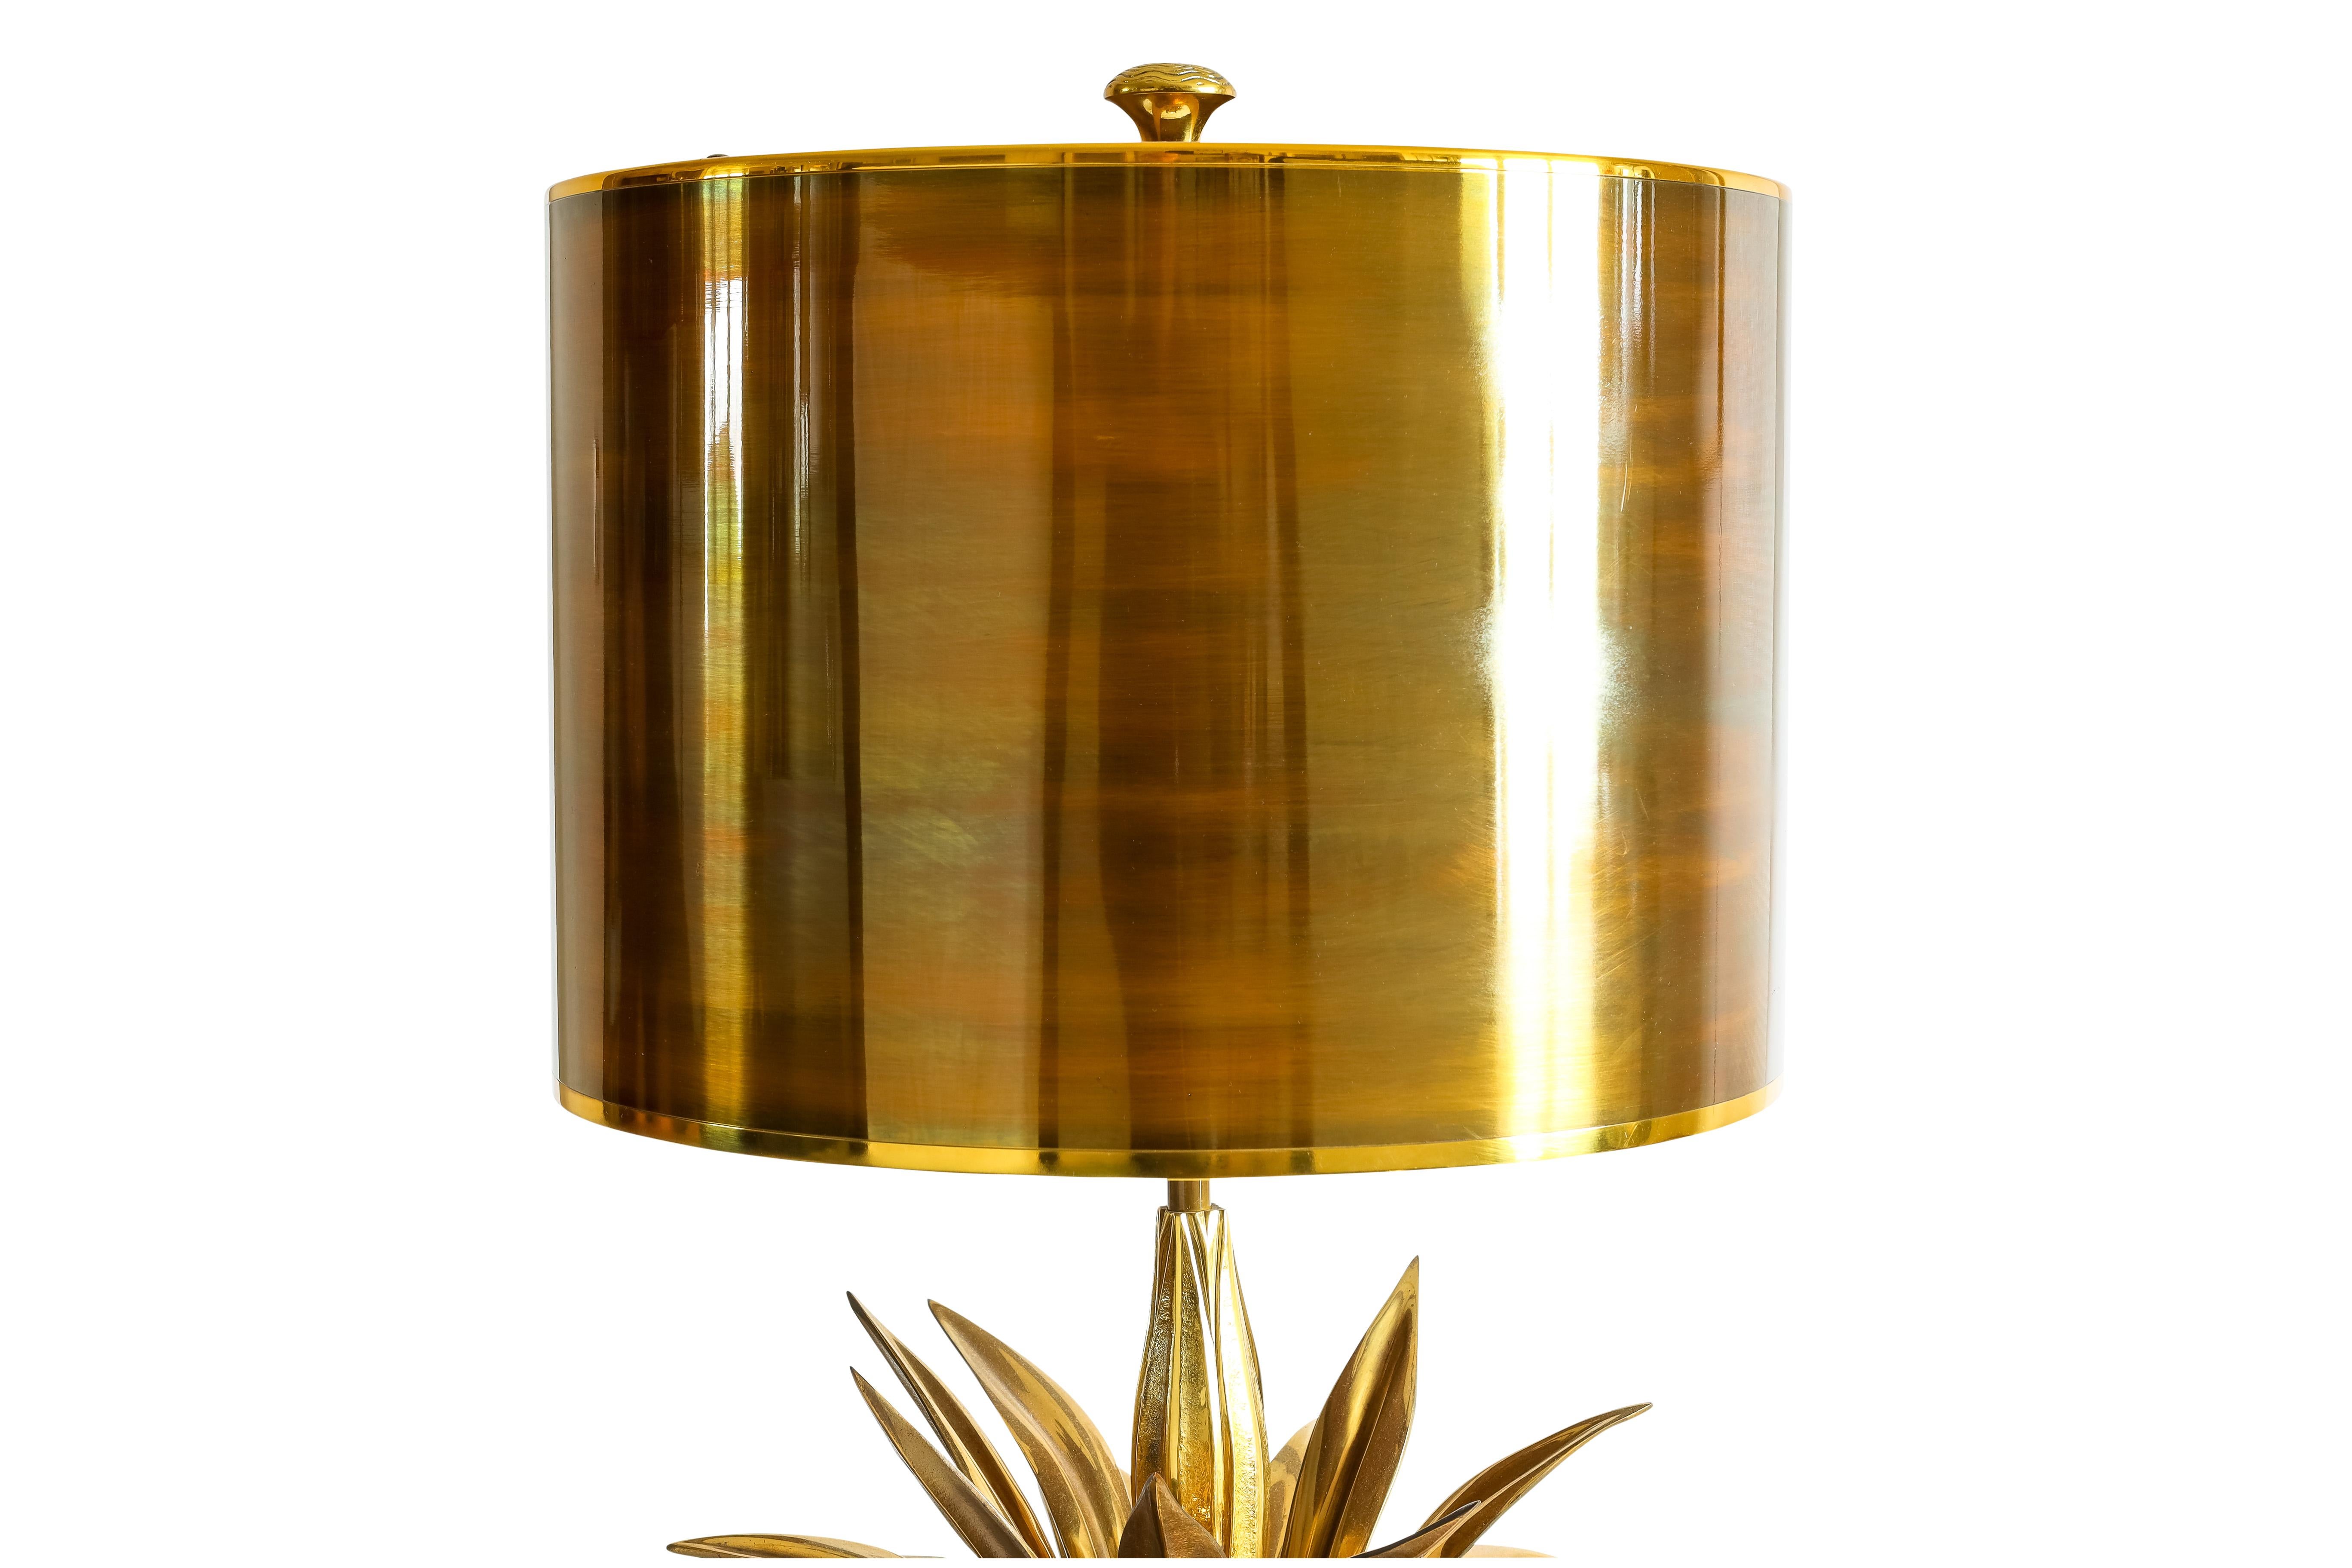 Impressive by its scale, this lamp was designed by Maison Charles. The lamp  is in the Maison Charles catalogue. The base and the circular shade are in brass and the floral ornament is in bronze. There is a variation of tones between the central